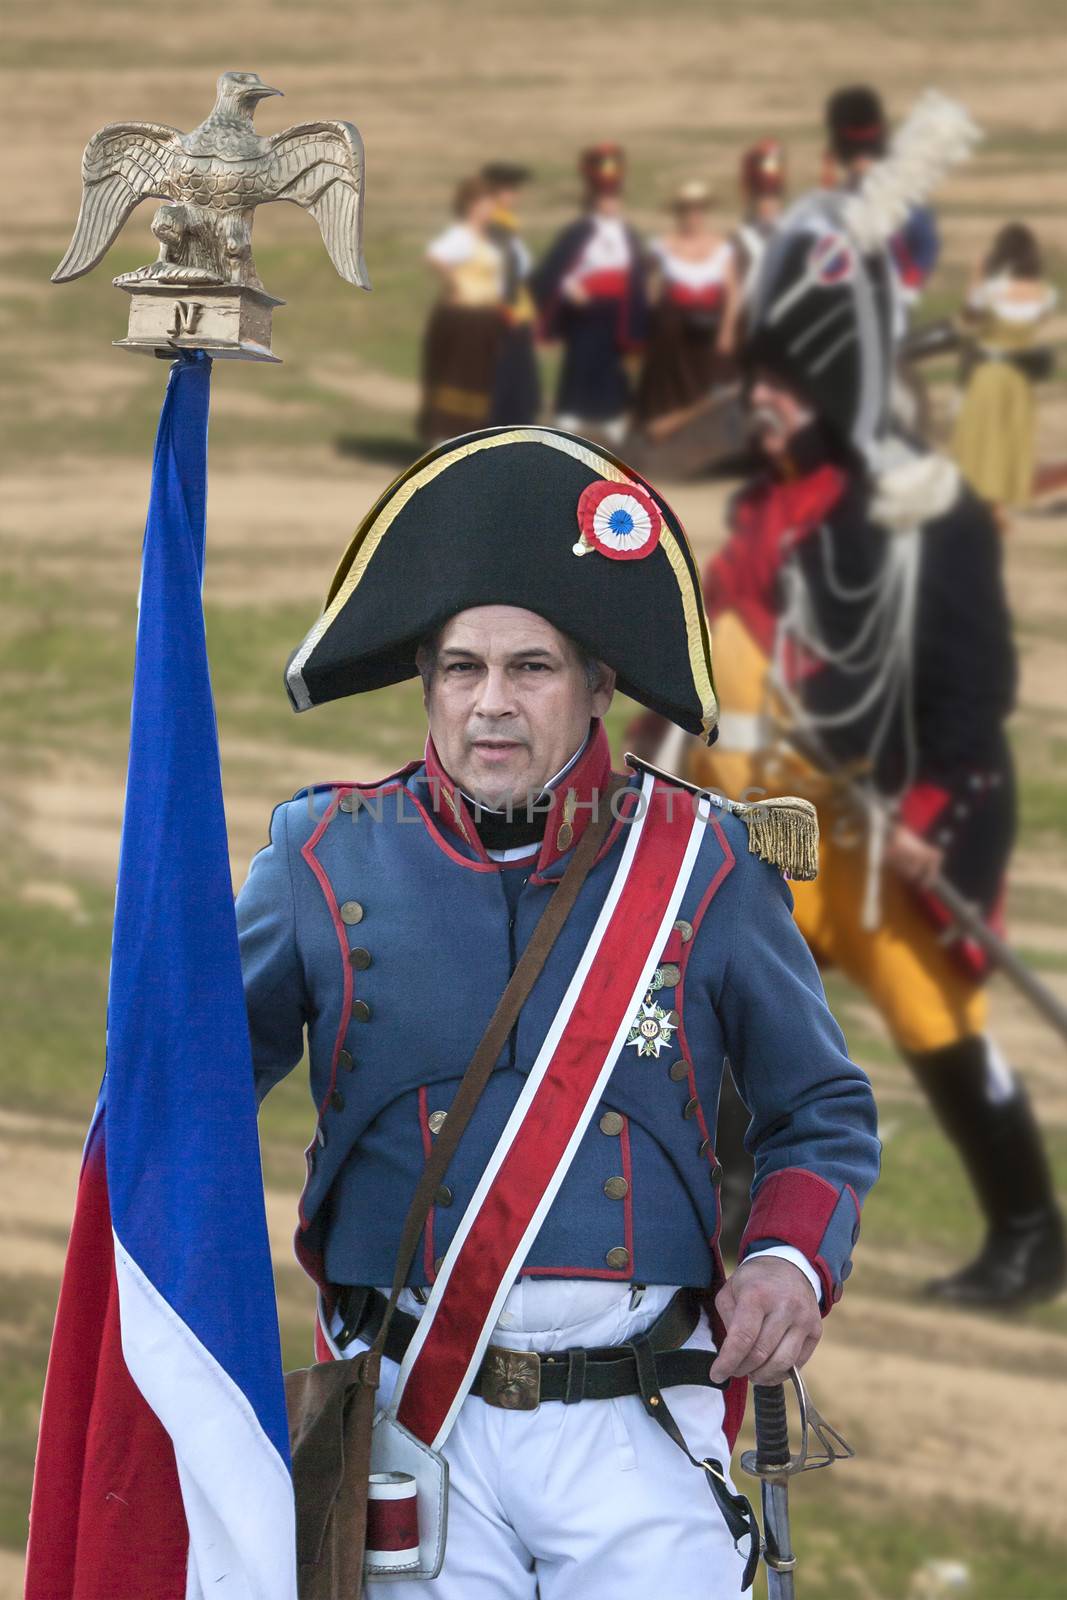 French soldier with the French flag during Representation of the Battle of Bailen, Bailen  Jaen province, Andalusia, Spain